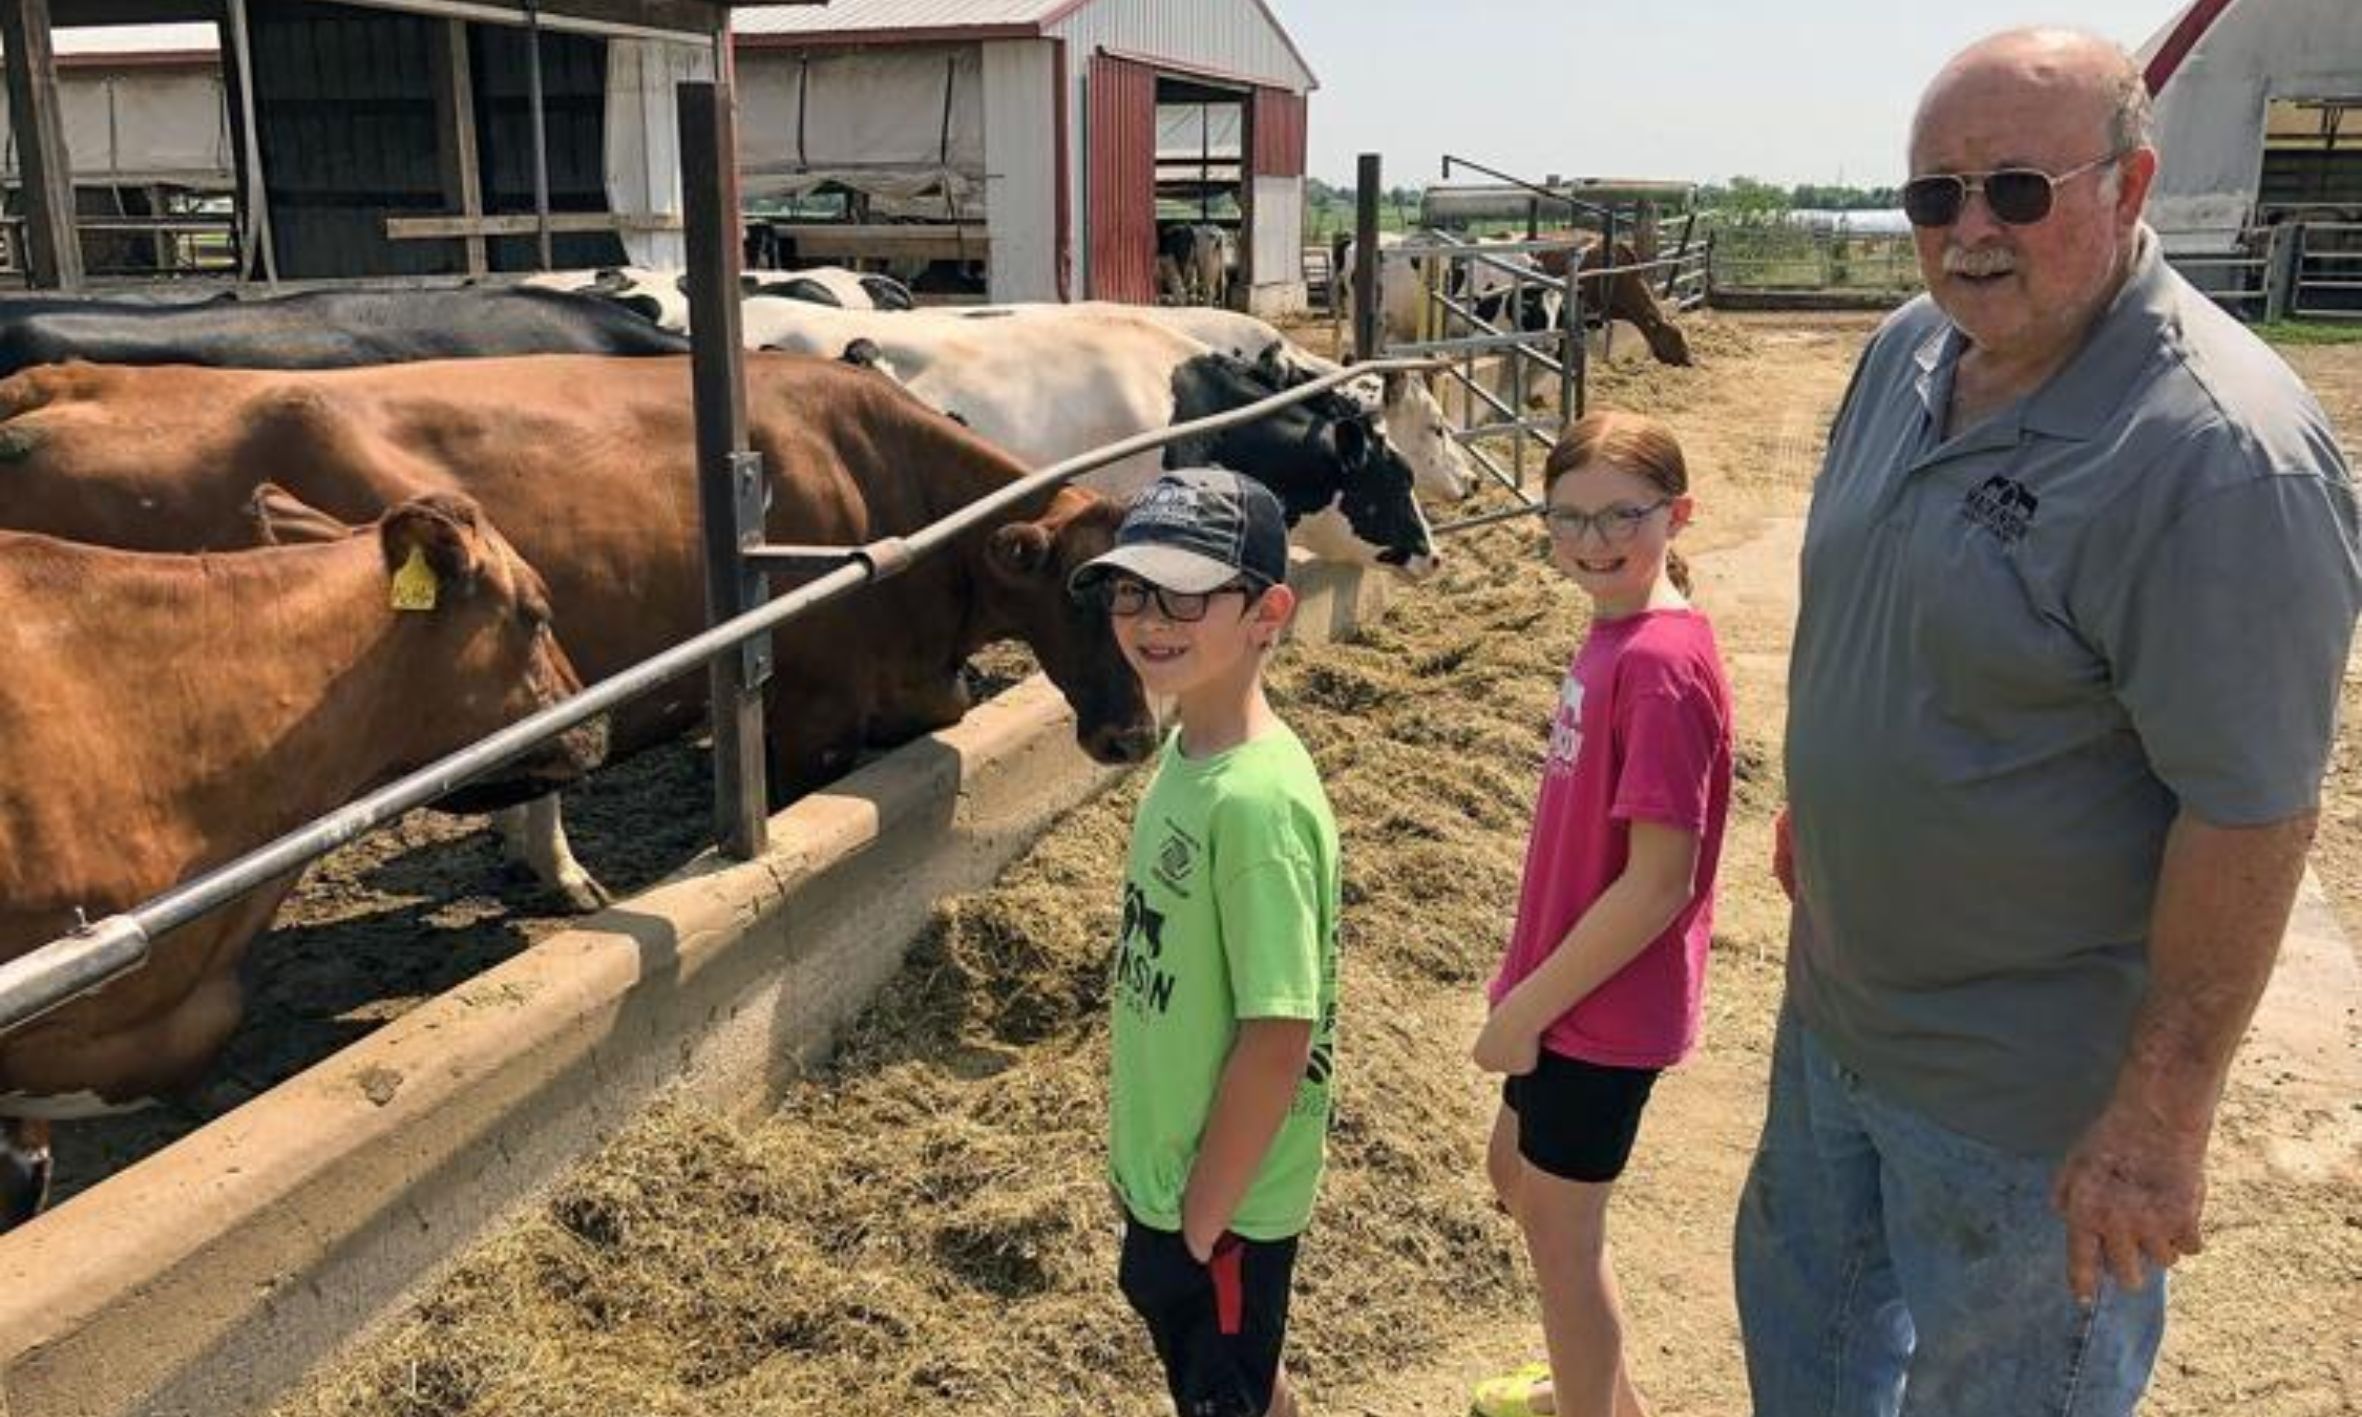 Longtime dairy farmer sees bright future amid challenges